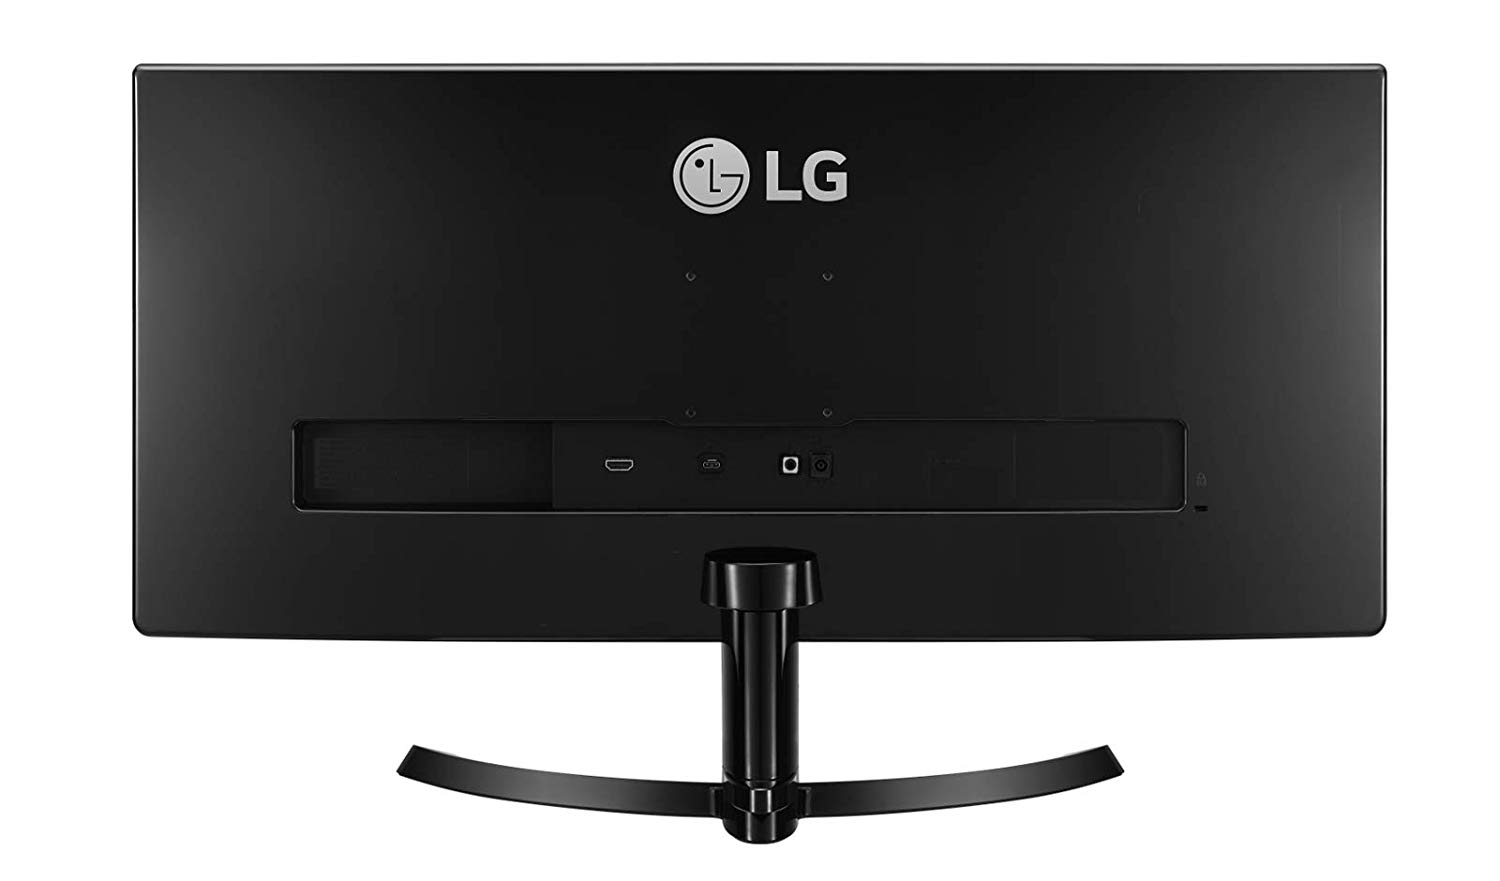 IPS 29" UltraWide LG 29UM59A LED Monitor with 75hz Refresh for $161.10